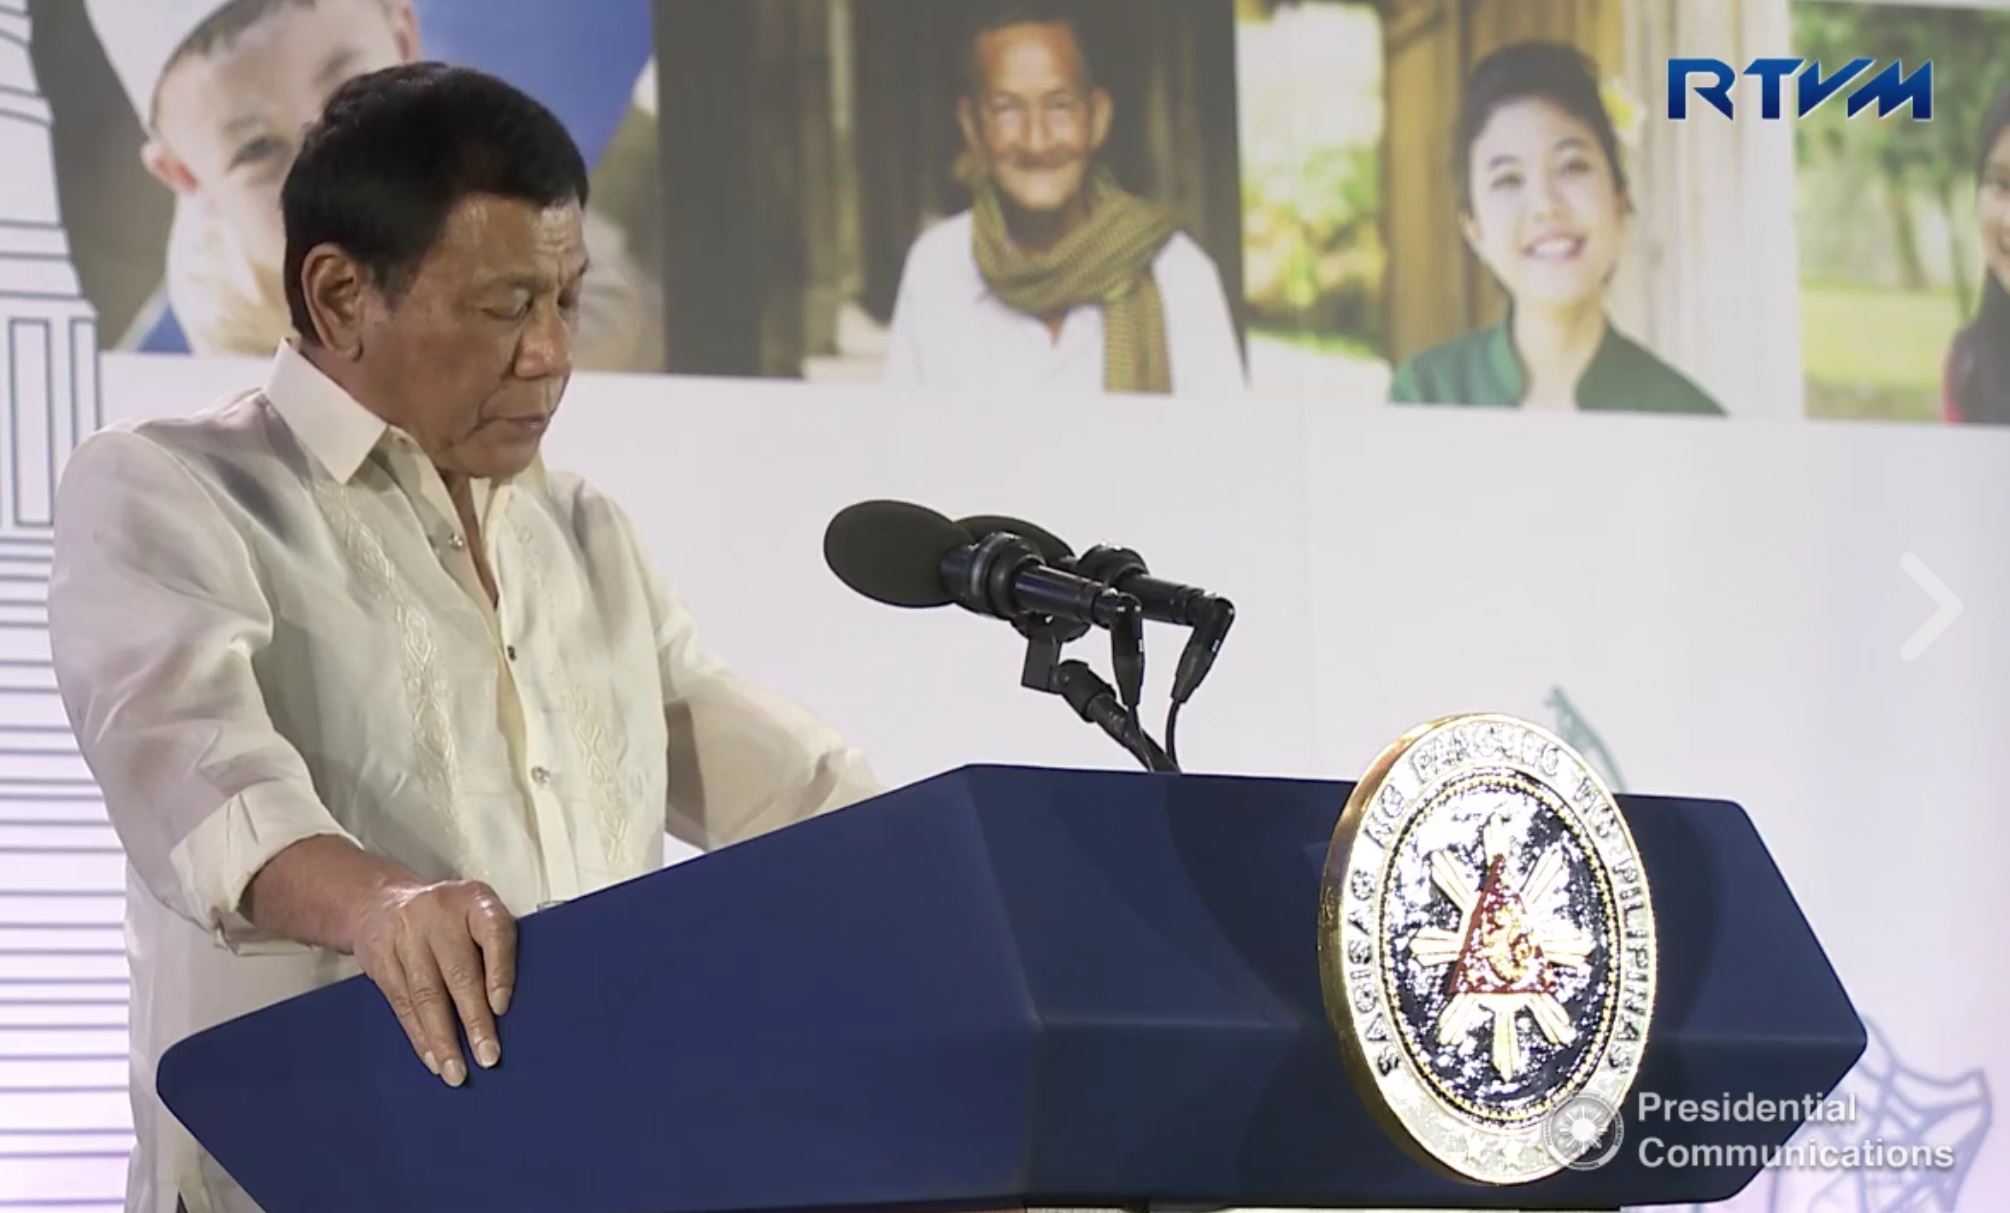 Philippine president Rodrigo Duterte speaking at the launch of the ASEAN chairmanship of the Philippines at the SMX Convention Center in Davao City on January 15. (Photo grabbed from RTVM video)